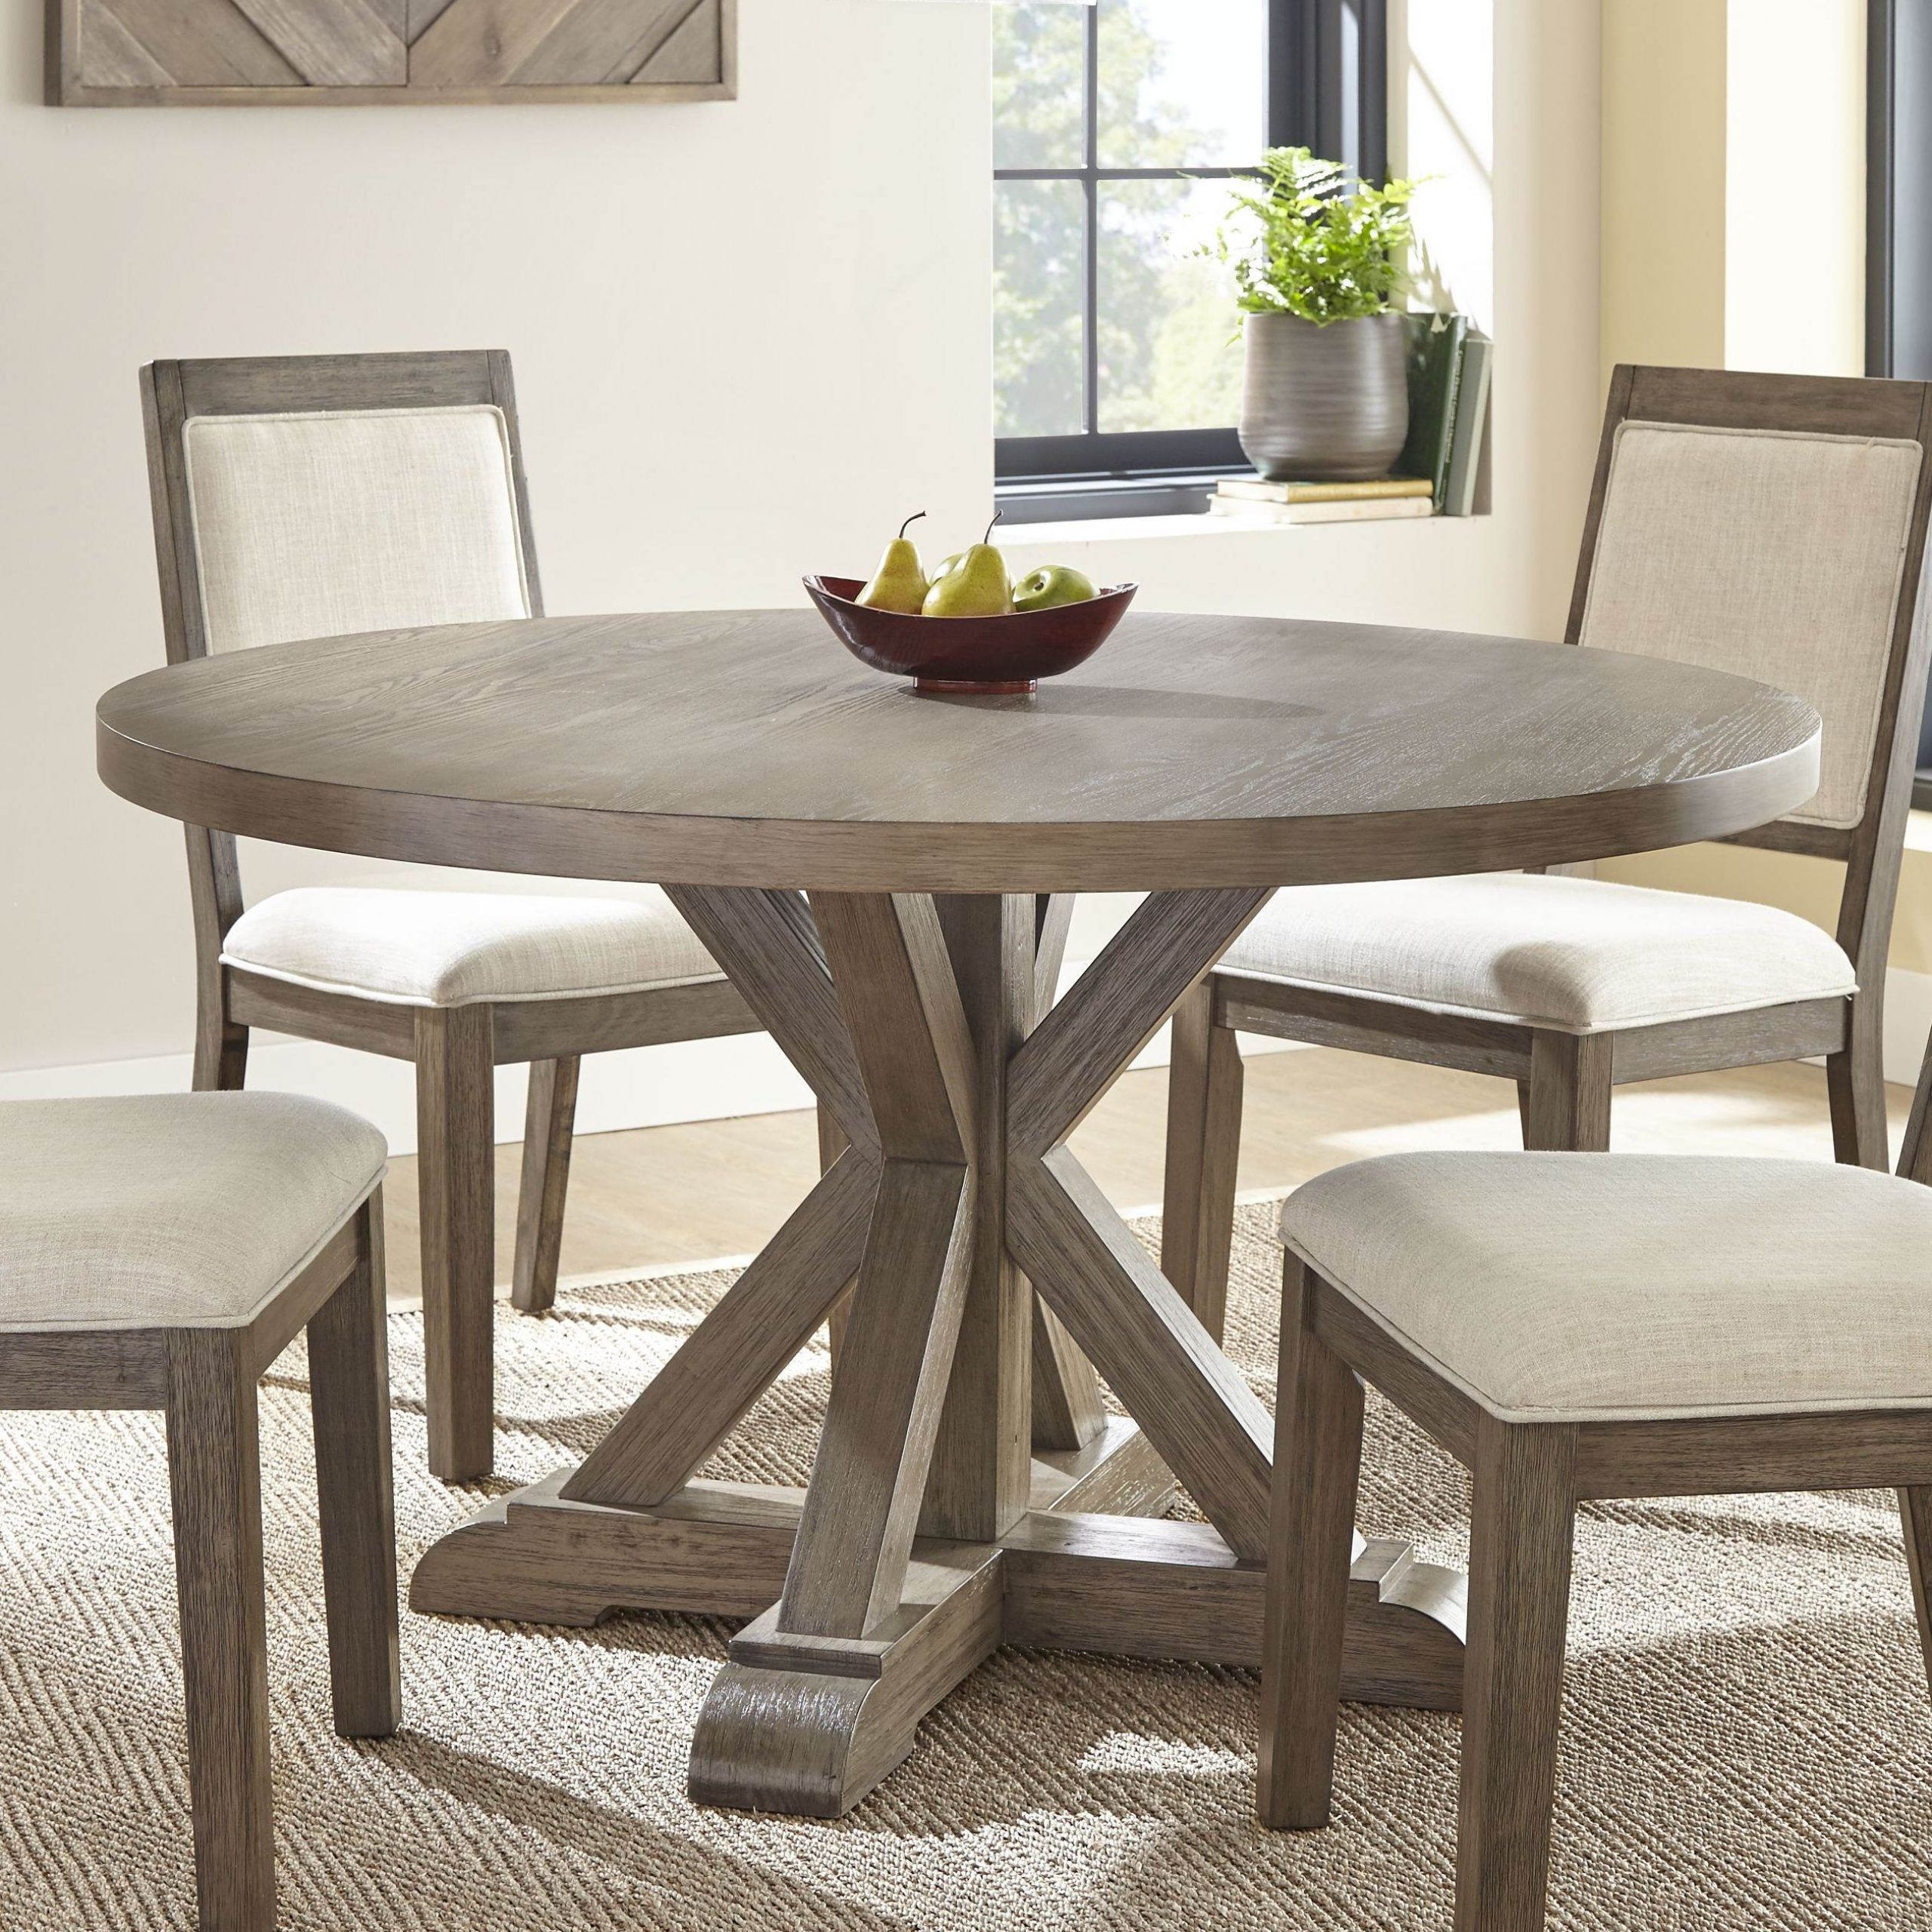 Steve Silver Molly Grey Washed Round Dining Table | The Throughout Recent Silver Dining Tables (View 4 of 15)